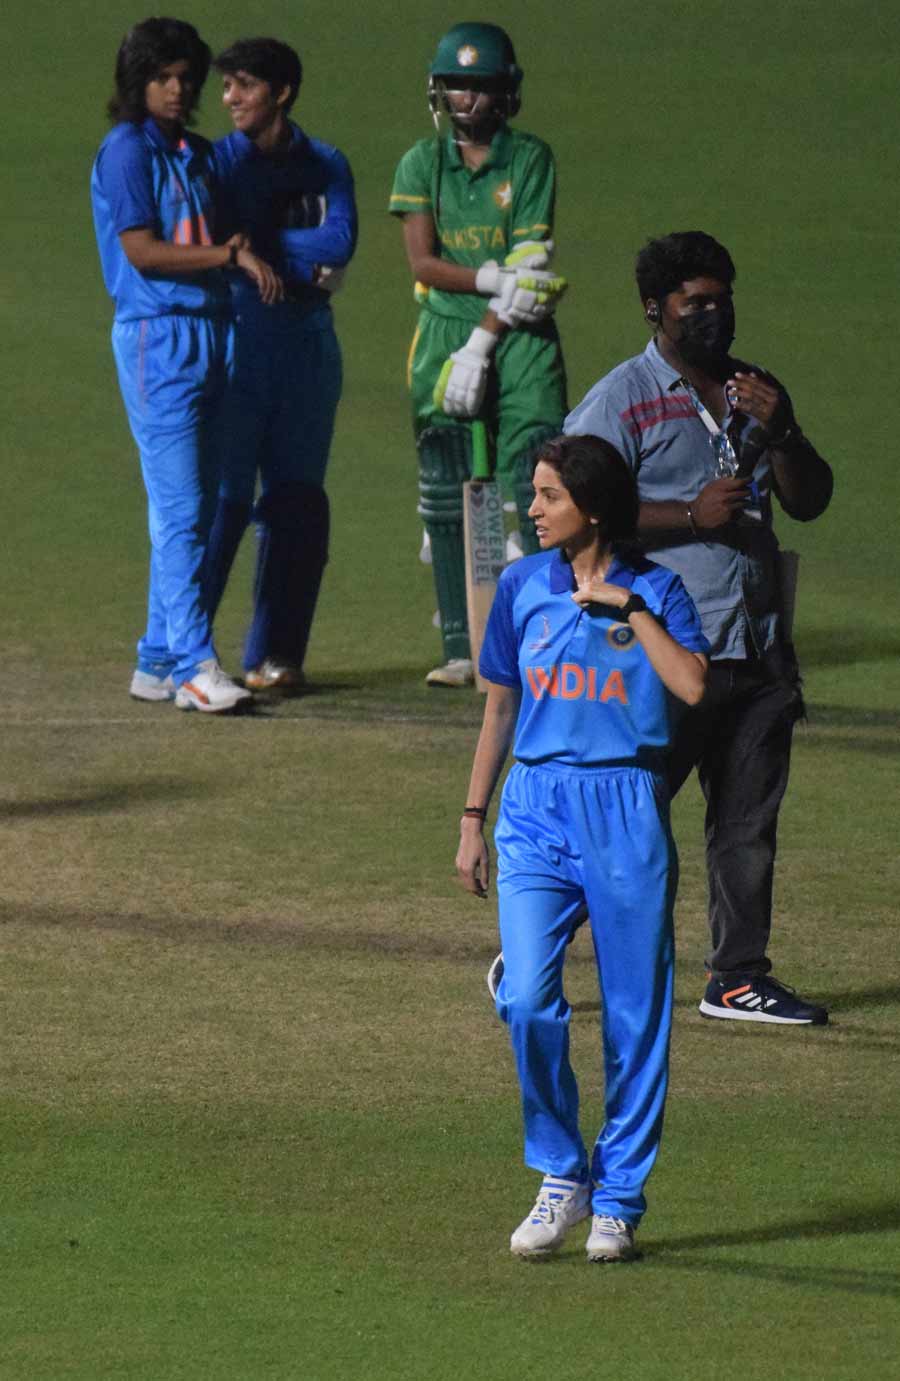 The biopic traces Goswami’s journey and how she overcame challenges to fulfil her dream of donning the India jersey